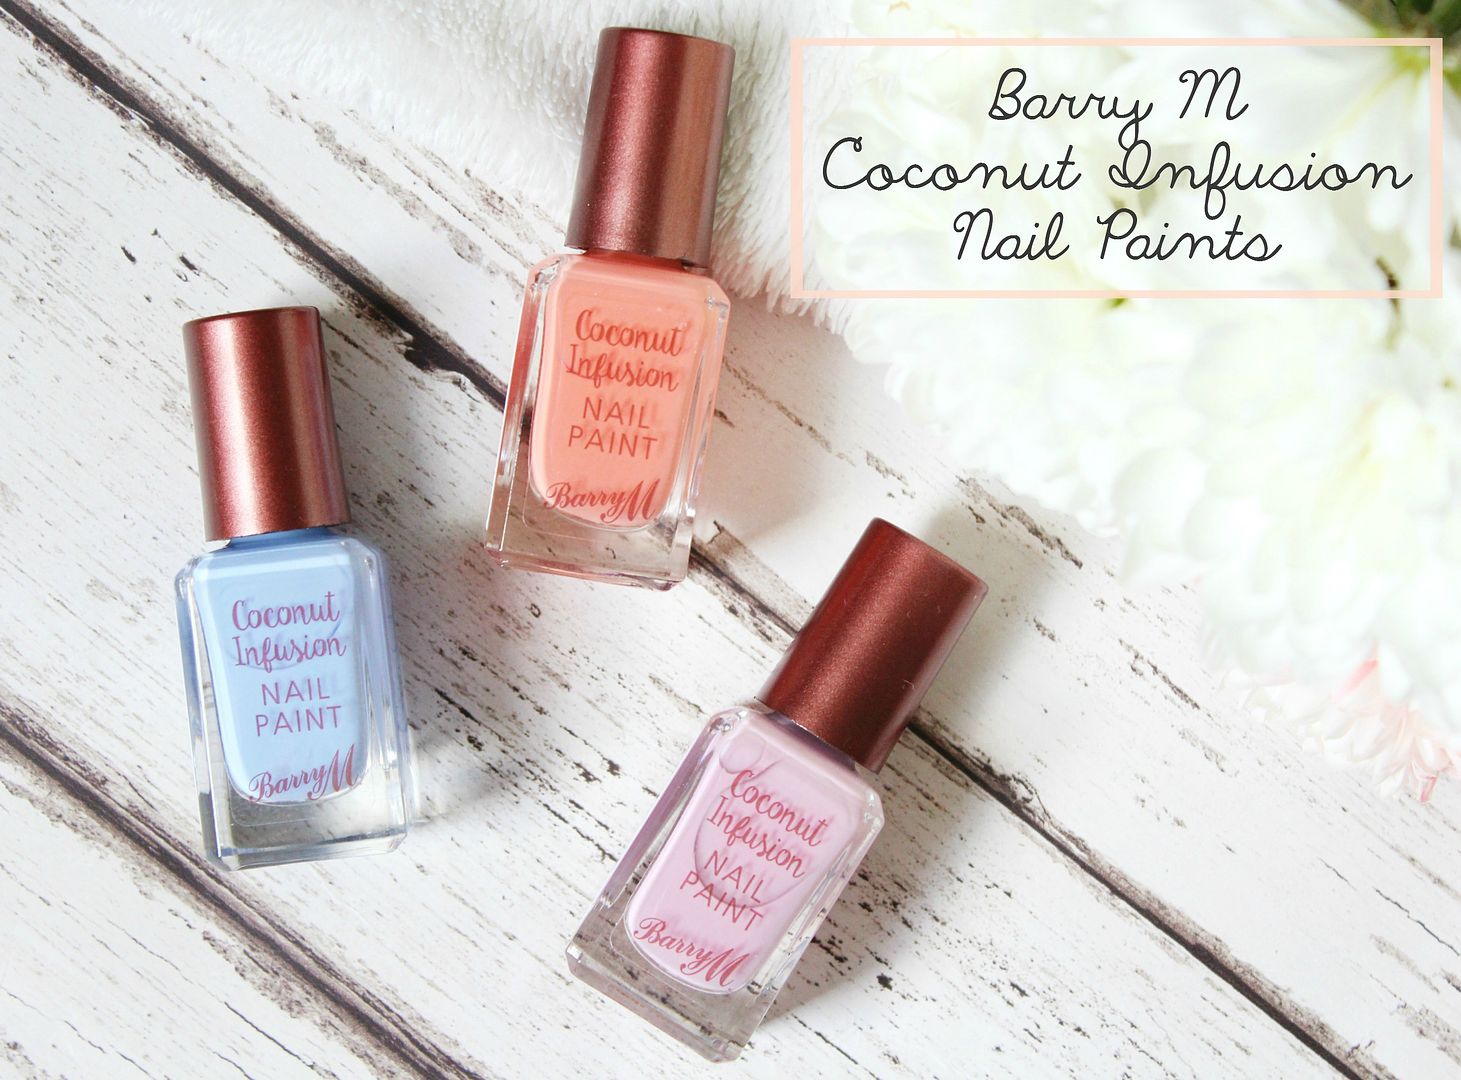 Barry M Coconut Infusion Nail Paints Laguna Flamingo Surfboard Review Swatches Belle-Amie UK Beauty Fashion Lifestyle Blog